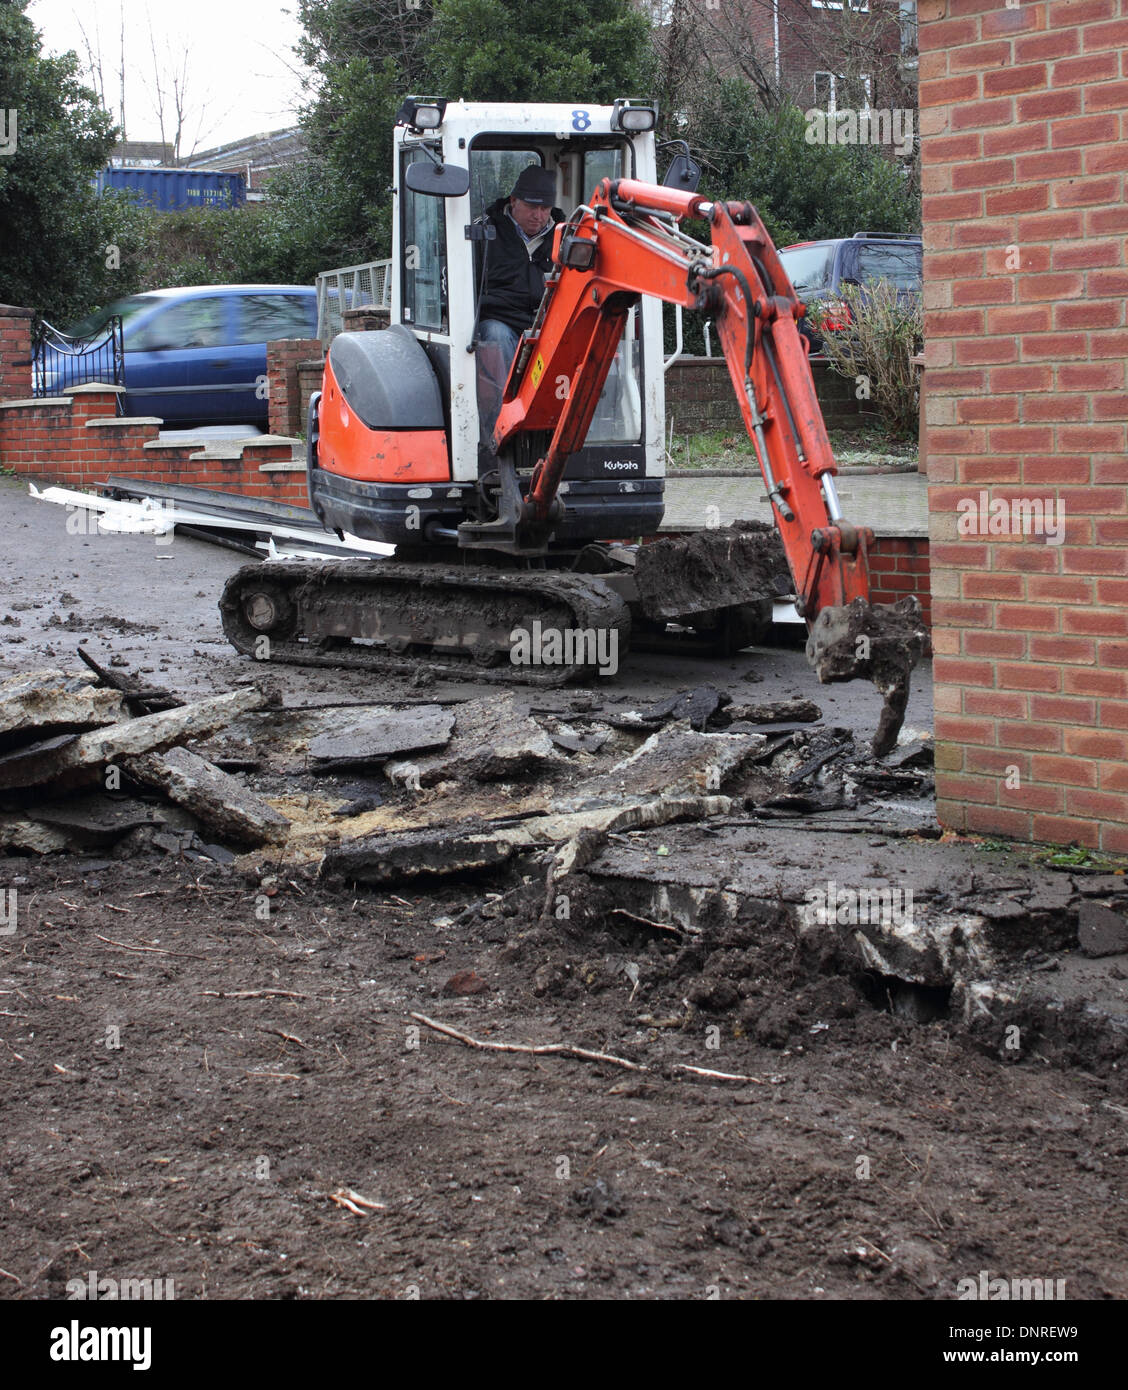 A mini digger being used in the preparation of groundwork for the laying of blockpaving Stock Photo